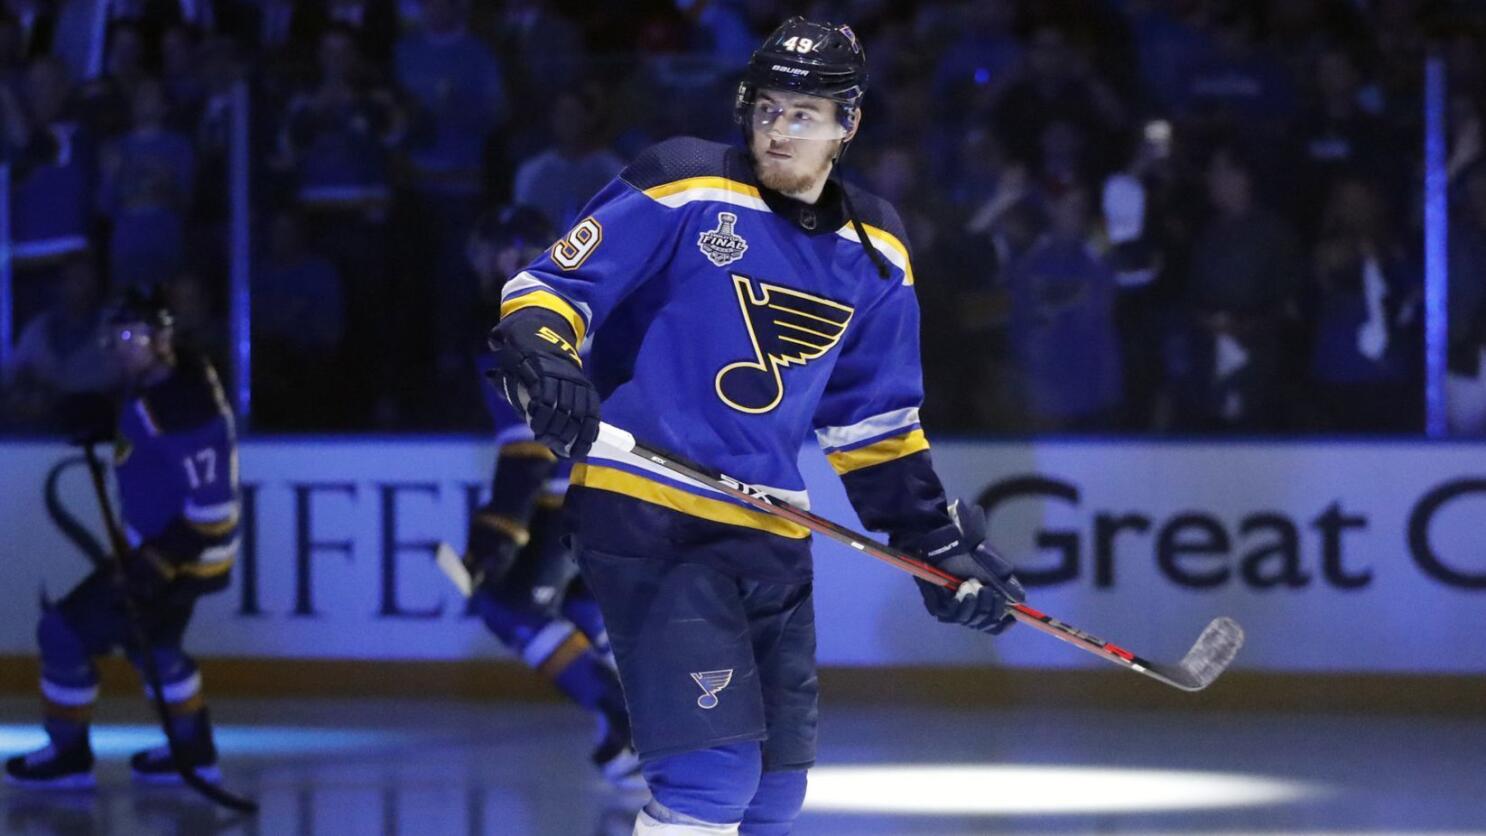 St. Louis Blues - It wasn't a good game when it comes to